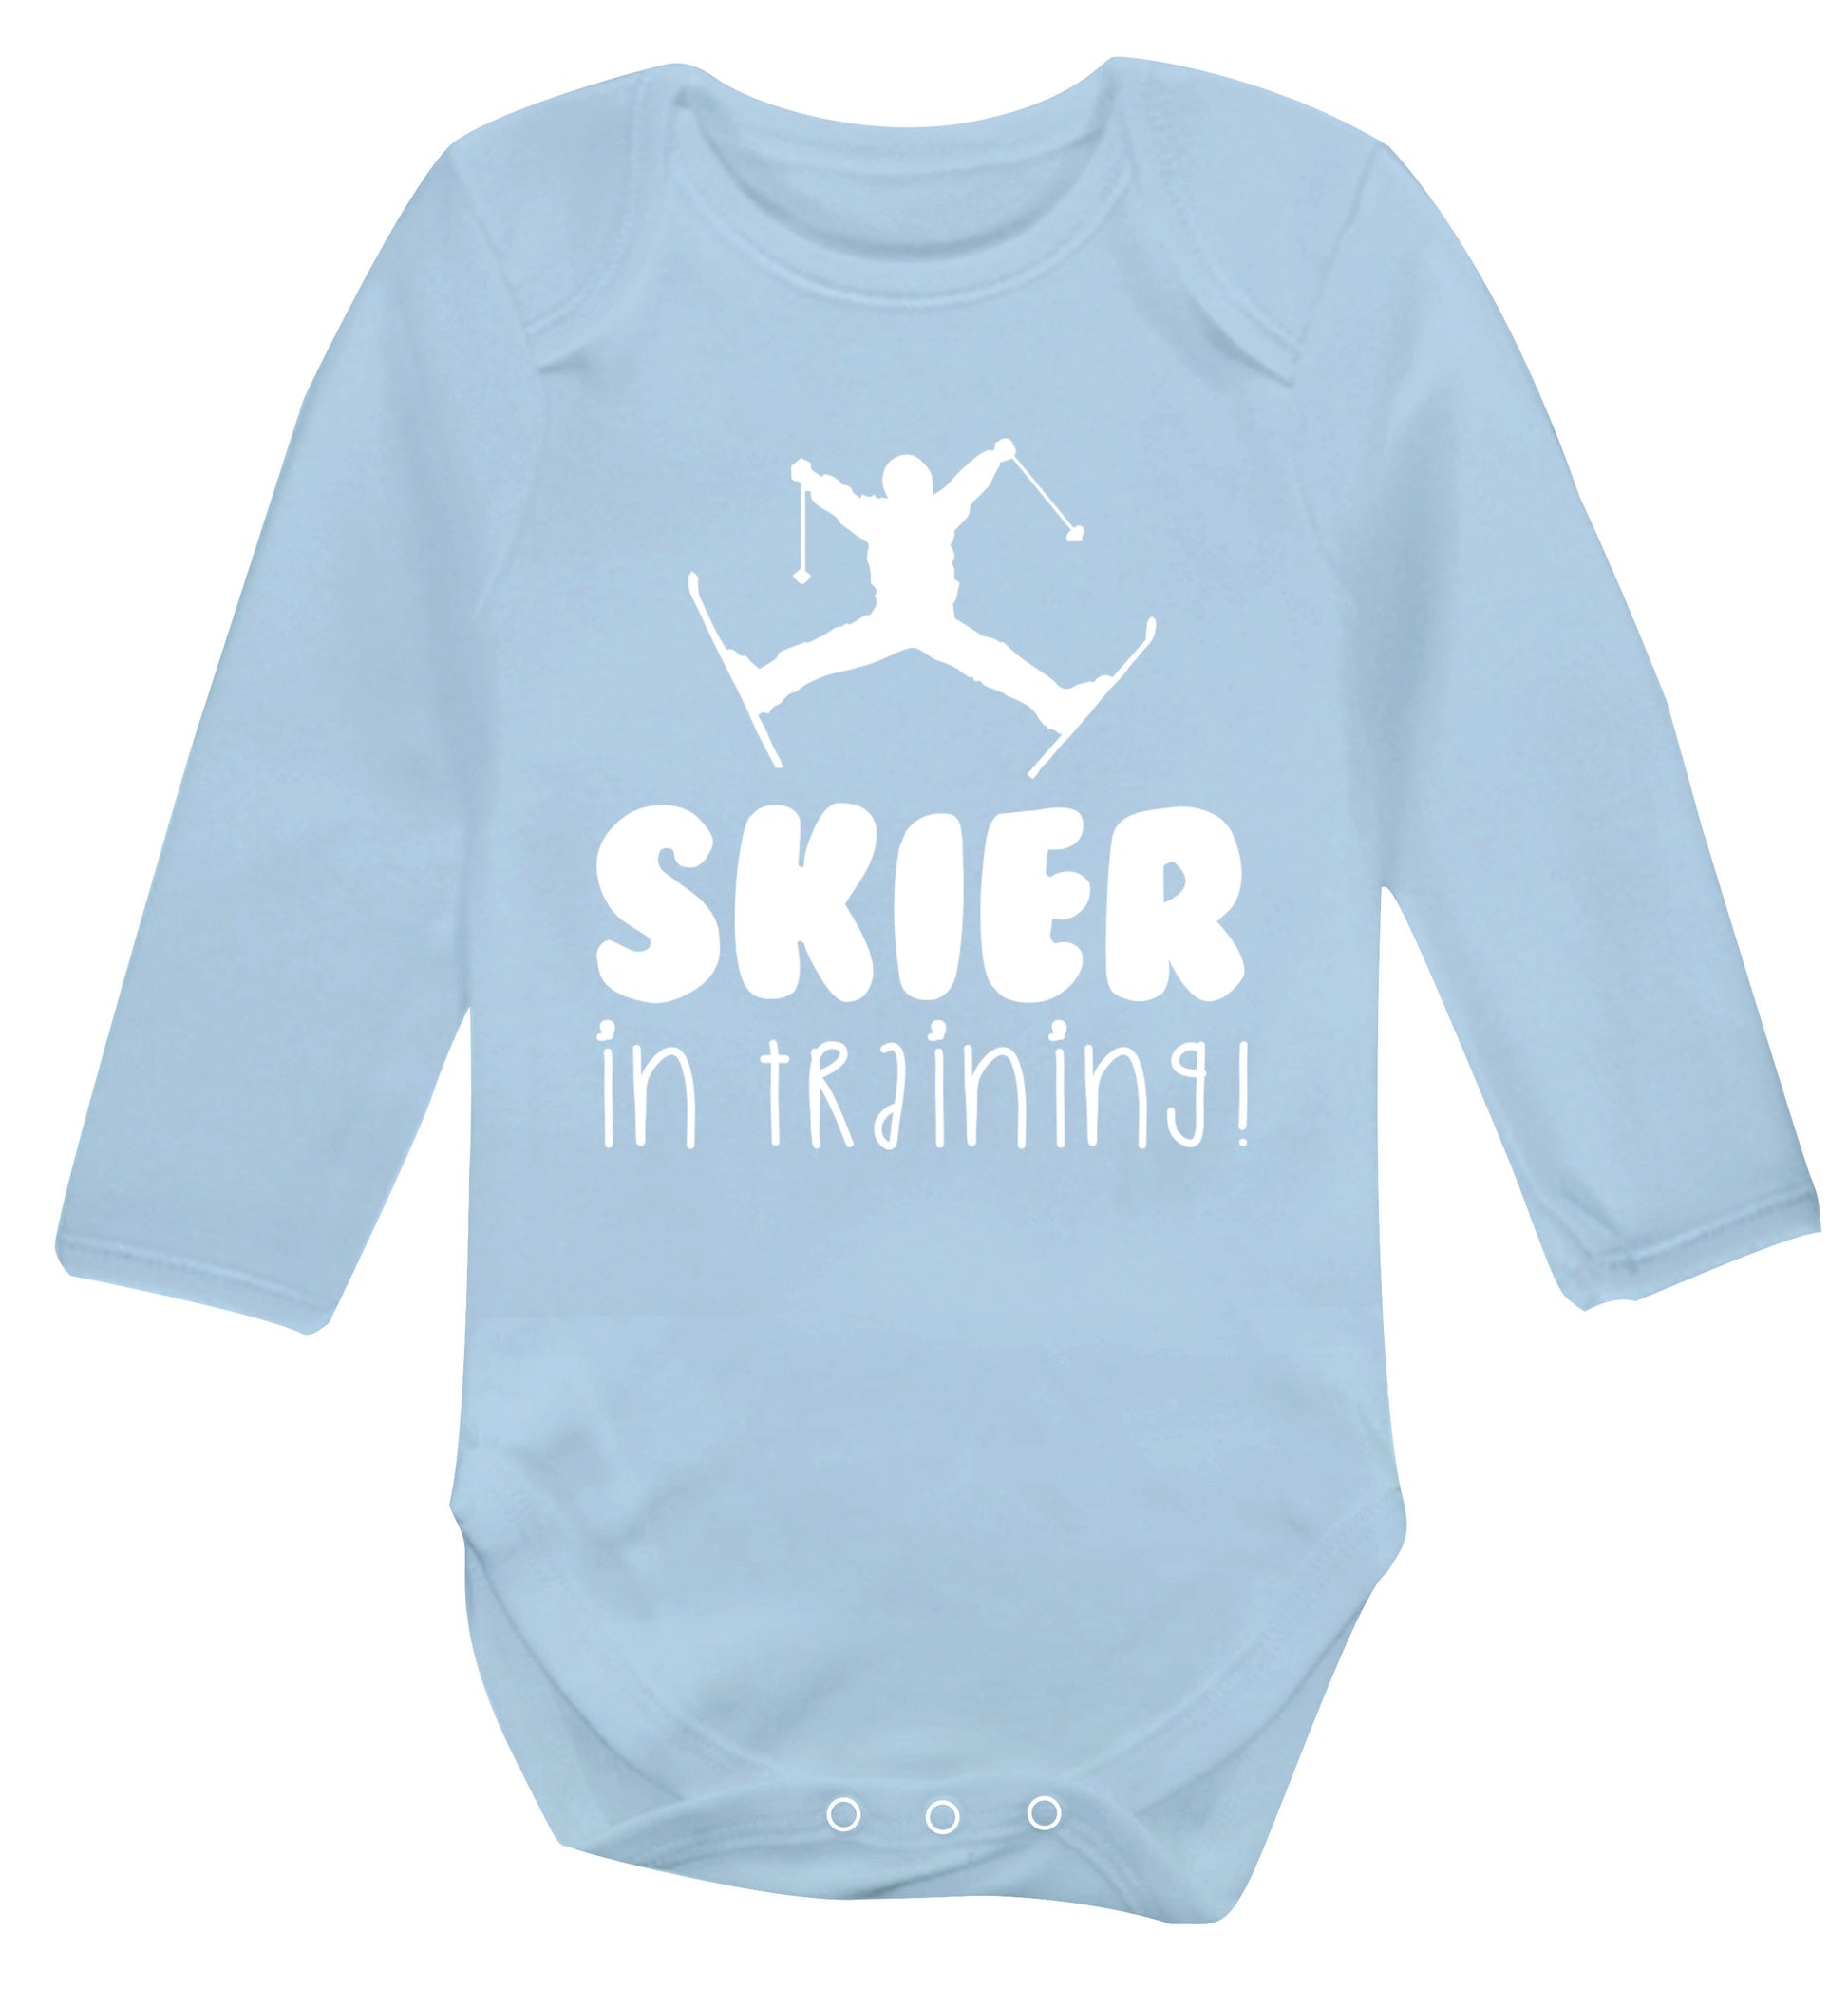 Skier in training Baby Vest long sleeved pale blue 6-12 months